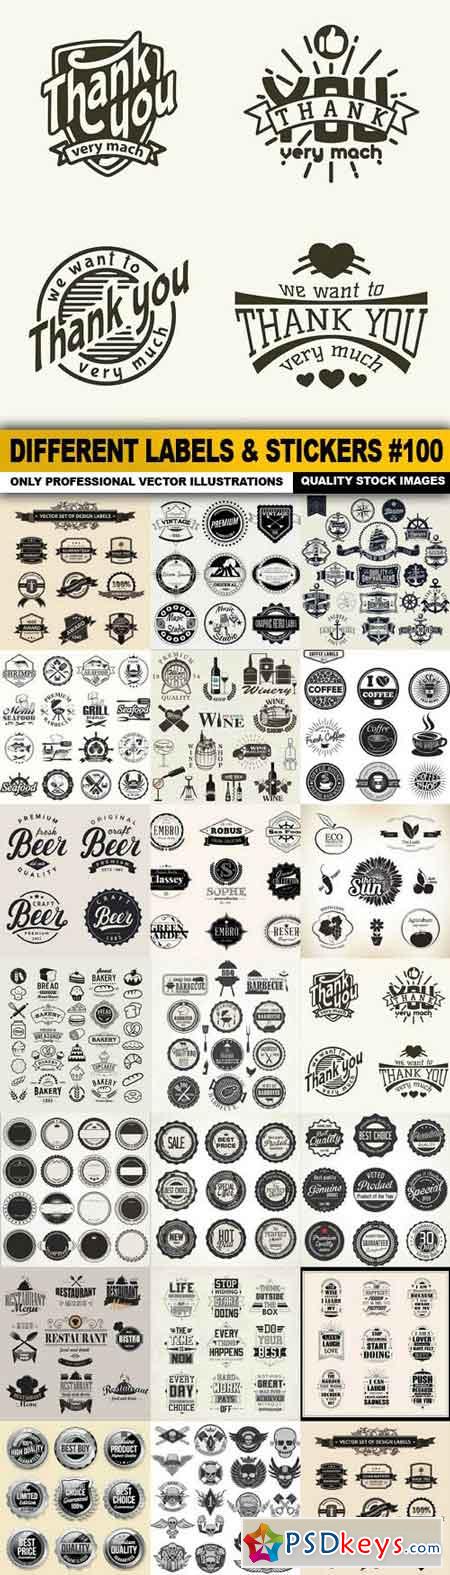 Different Labels & Stickers #100 - 20 Vector